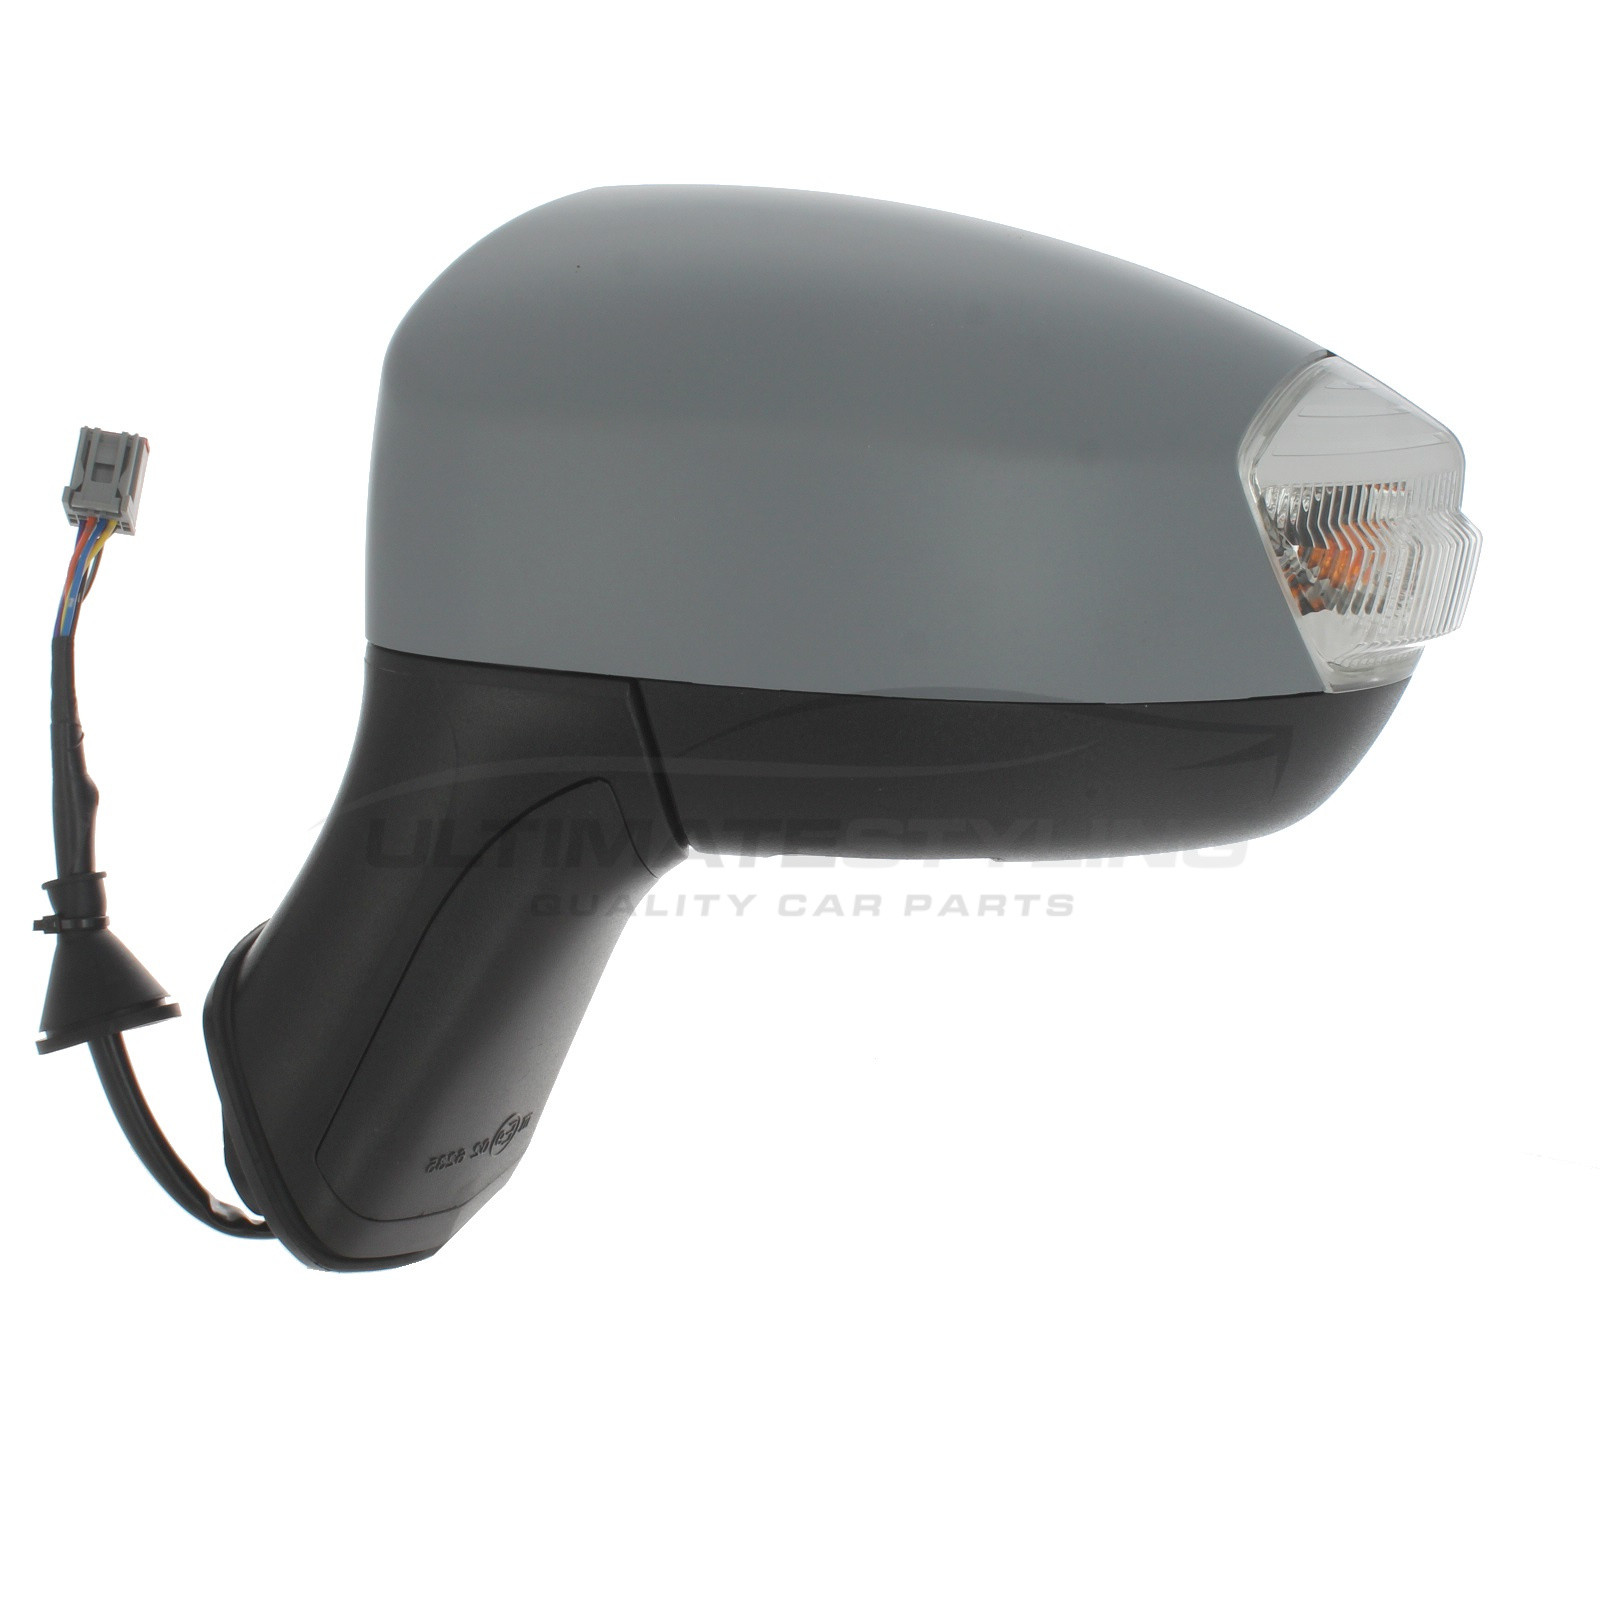 Ford Kuga Wing Mirror / Door Mirror - Passenger Side (LH) - Electric adjustment - Heated Glass - Indicator - Puddle Light - Primed